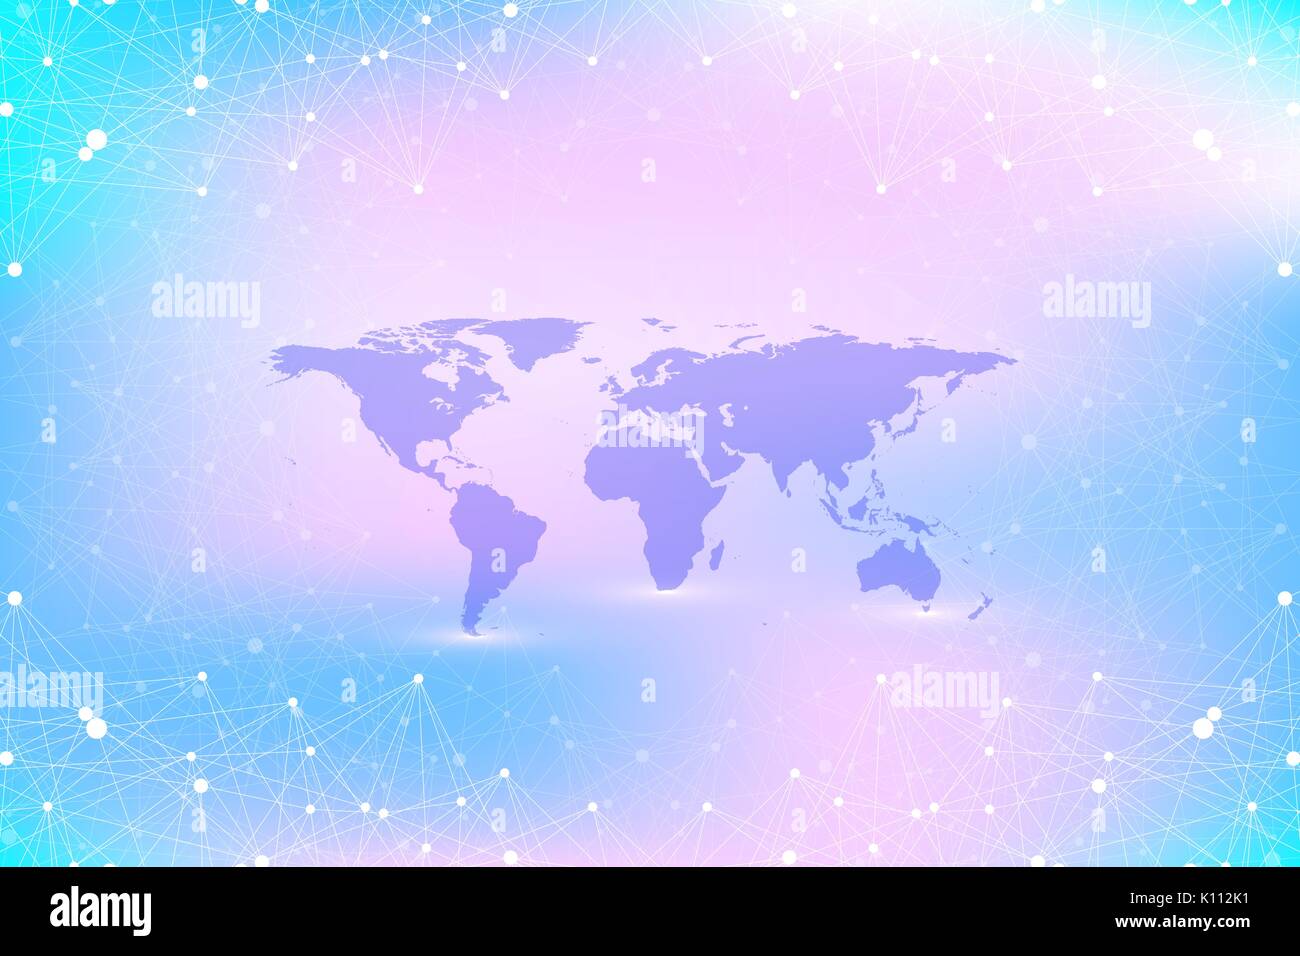 Political World Map with global technology networking concept. Digital data visualization. Scientific cybernetic particle compounds. Big Data background communication. Vector illustration. Stock Vector